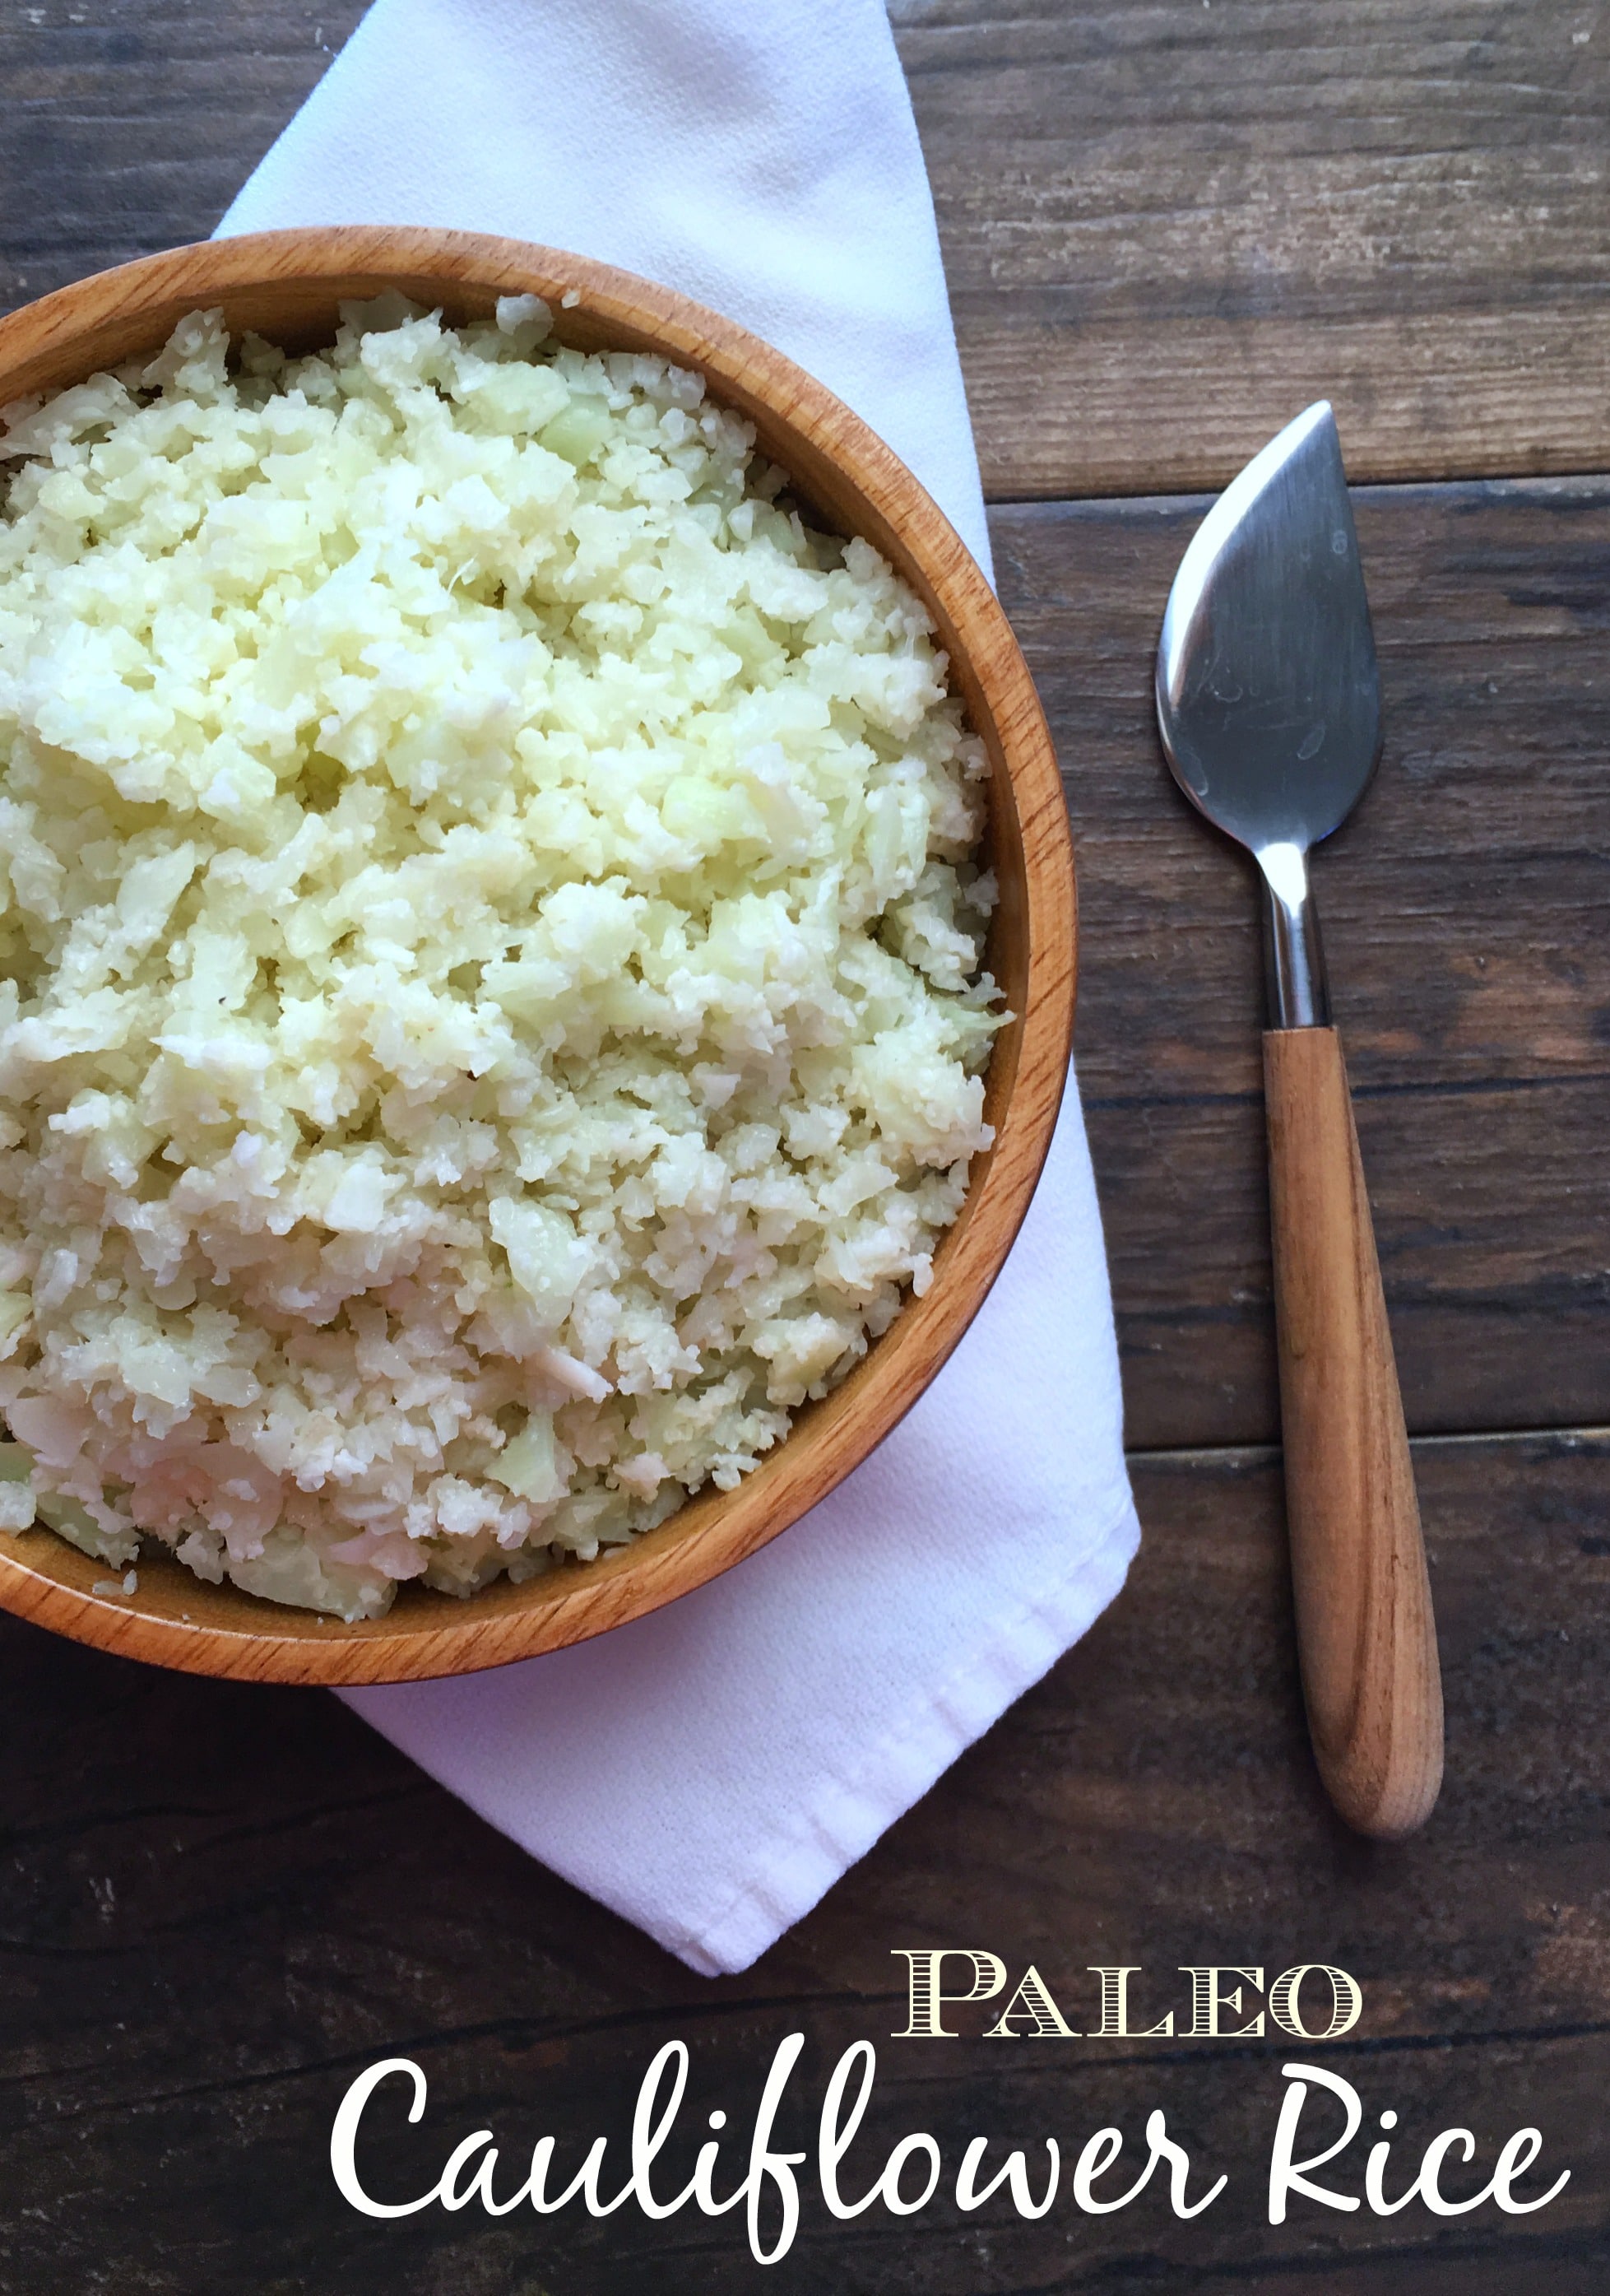 This healthy Paleo Cauliflower Rice is a delicious and filling side dish that you can add to your diet for it's impressive array of nutrients, including vitamins, minerals and antioxidants.